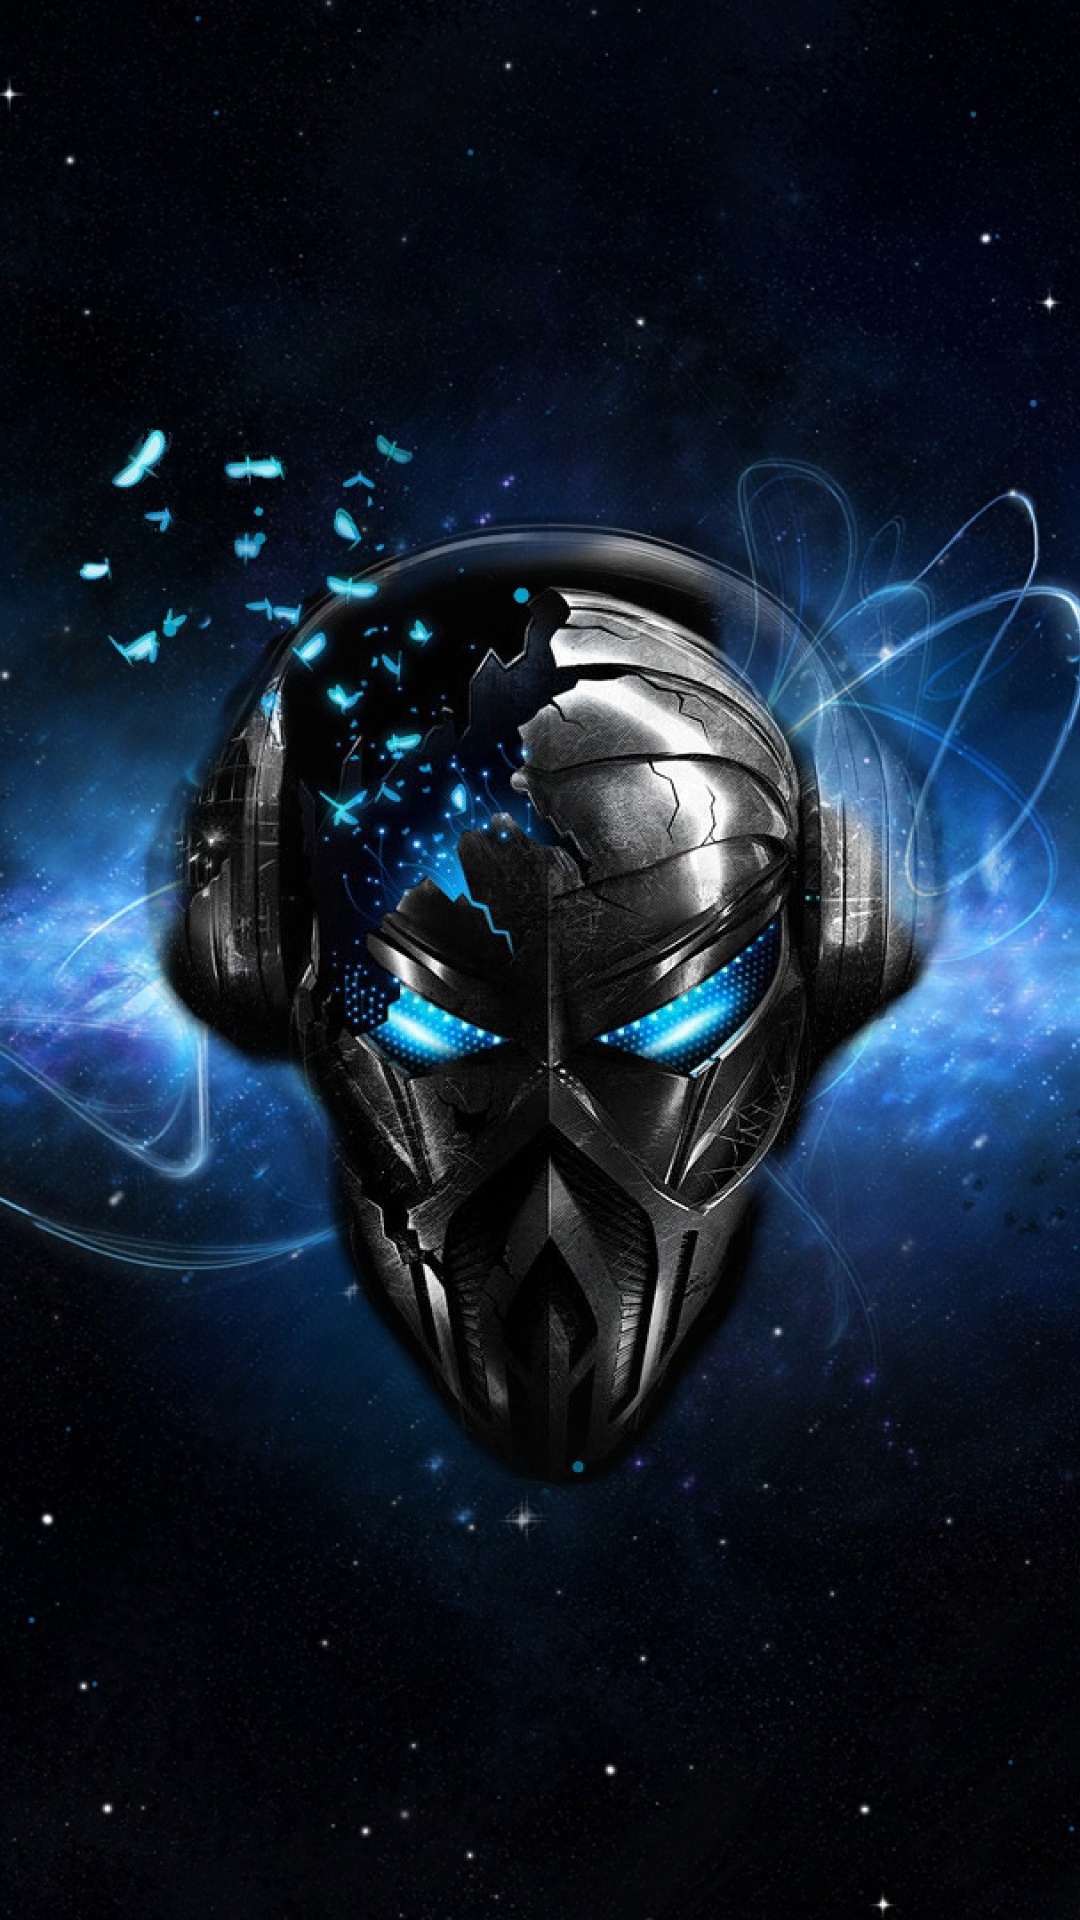 Blue and Black Mask With Blue and Black Light. Wallpaper in 1080x1920 Resolution